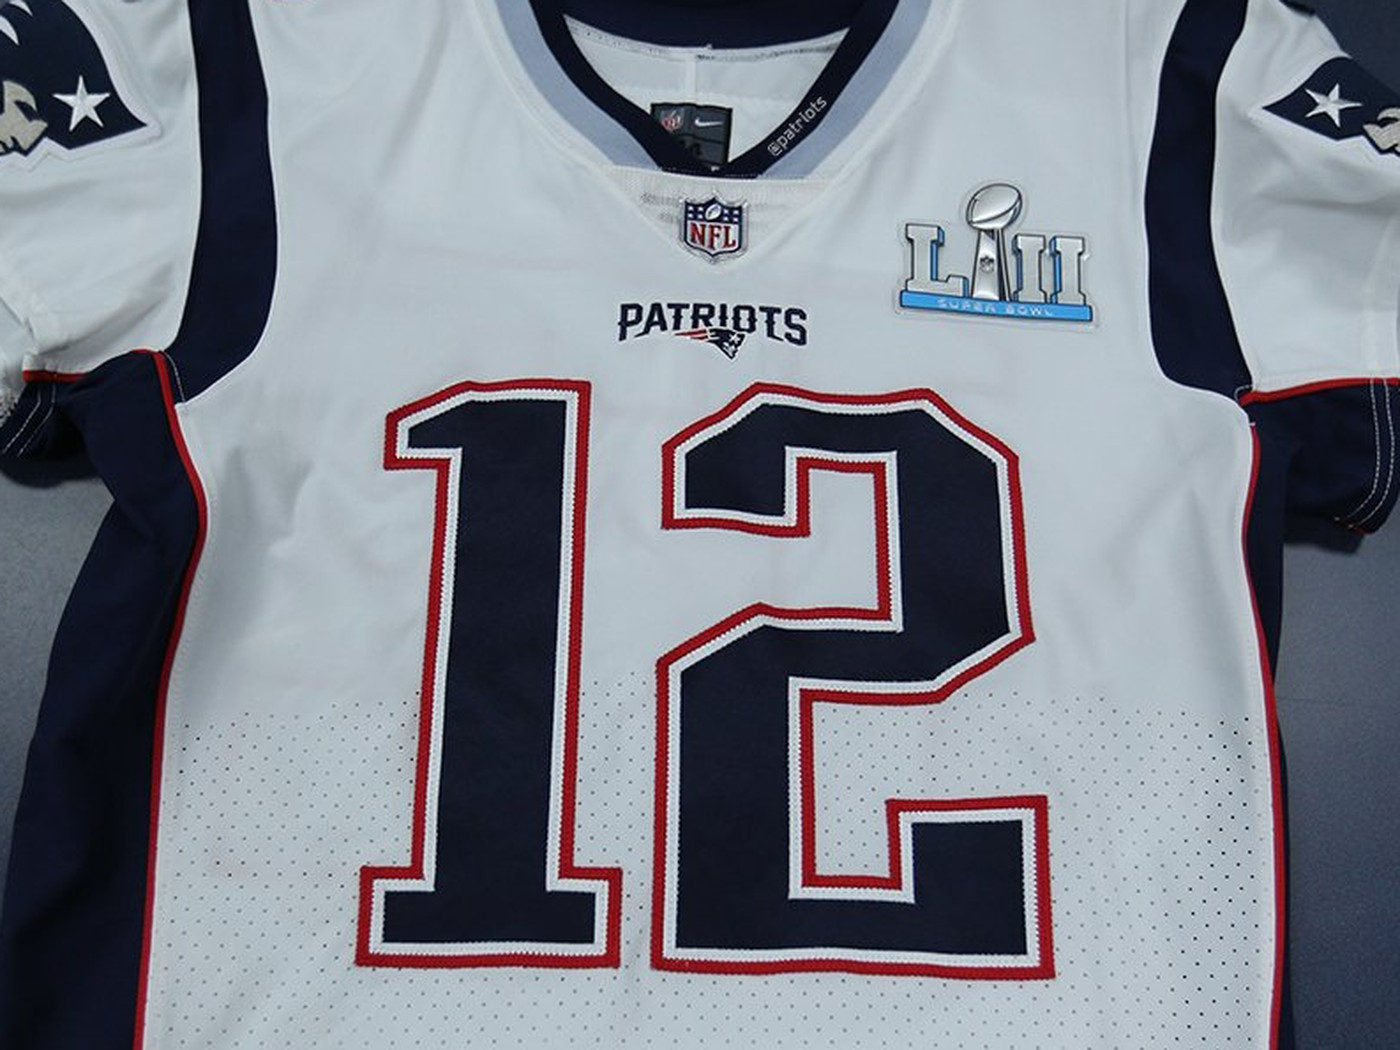 white jerseys in the super bowl